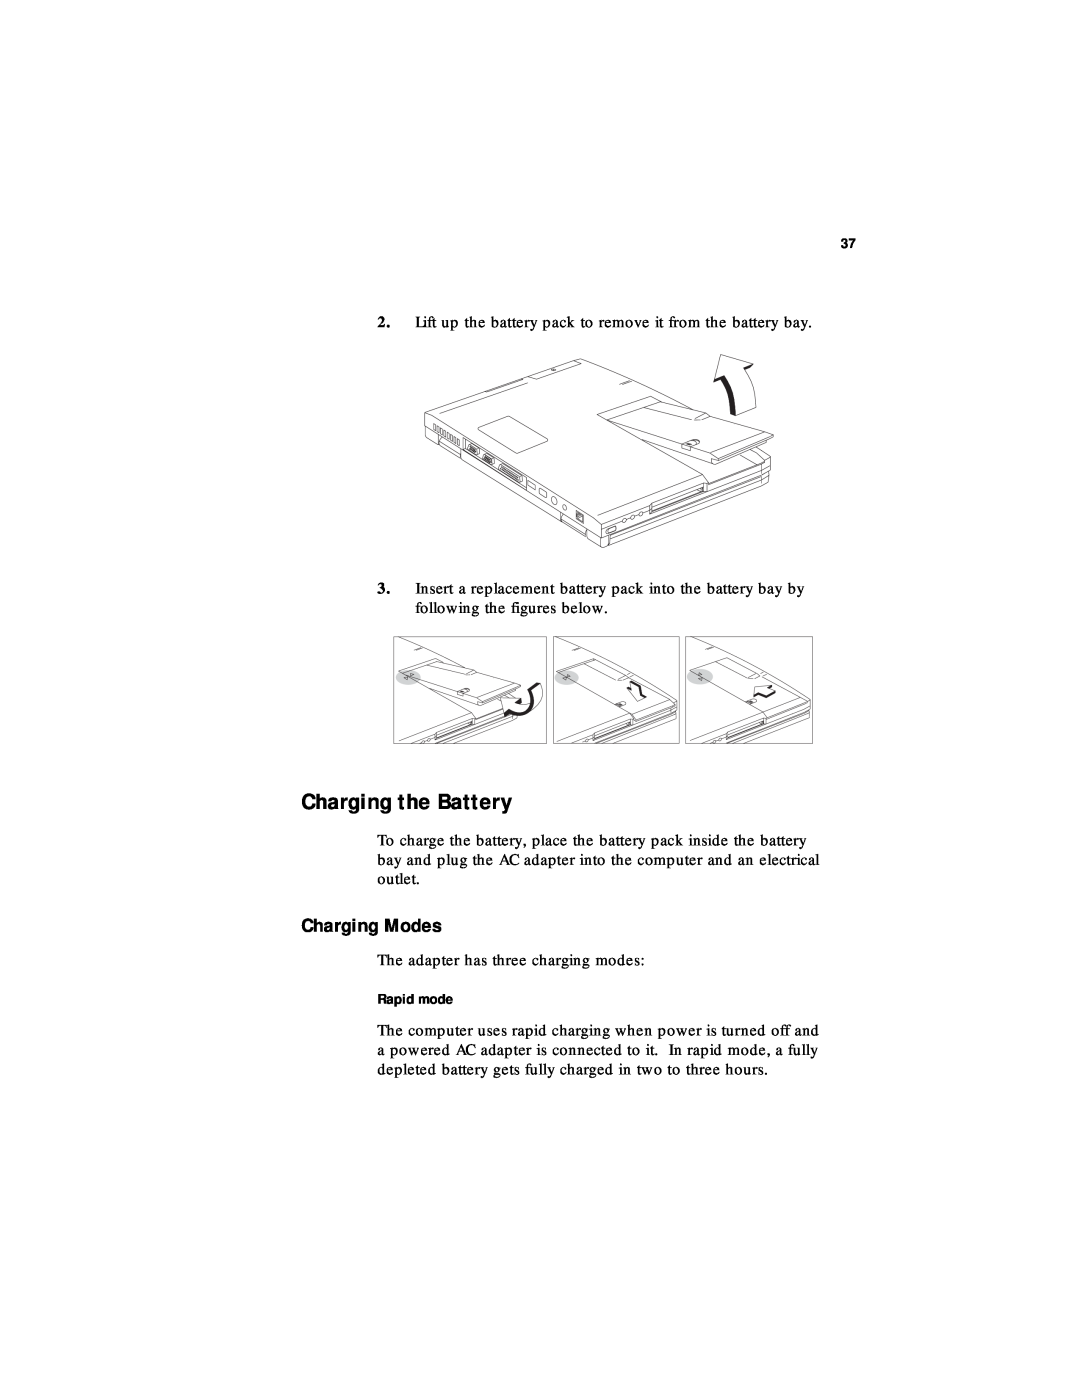 Acer 330 Series manual Charging the Battery, Charging Modes, Rapid mode 